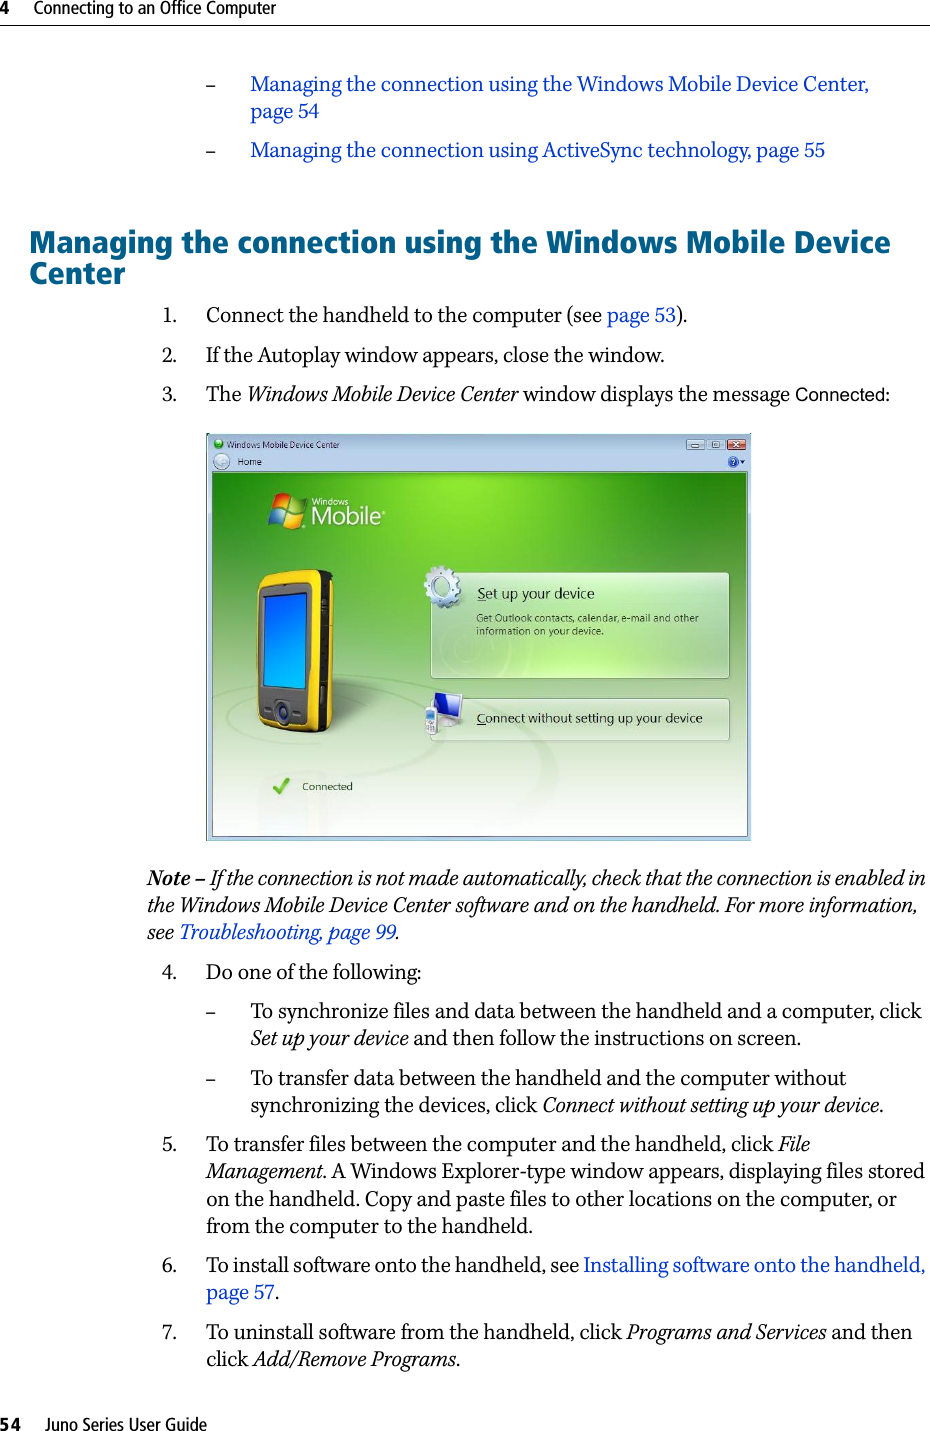 4     Connecting to an Office Computer54     Juno Series User Guide–Managing the connection using the Windows Mobile Device Center, page 54–Managing the connection using ActiveSync technology, page 55Managing the connection using the Windows Mobile Device Center1. Connect the handheld to the computer (see page 53). 2. If the Autoplay window appears, close the window.  3. The Windows Mobile Device Center window displays the message Connected:  Note – If the connection is not made automatically, check that the connection is enabled in the Windows Mobile Device Center software and on the handheld. For more information, see Troubleshooting, page 99.4. Do one of the following:–To synchronize files and data between the handheld and a computer, click Set up your device and then follow the instructions on screen. –To transfer data between the handheld and the computer without synchronizing the devices, click Connect without setting up your device.5. To transfer files between the computer and the handheld, click File Management. A Windows Explorer-type window appears, displaying files stored on the handheld. Copy and paste files to other locations on the computer, or from the computer to the handheld.6. To install software onto the handheld, see Installing software onto the handheld, page 57.7. To uninstall software from the handheld, click Programs and Services and then click Add/Remove Programs.